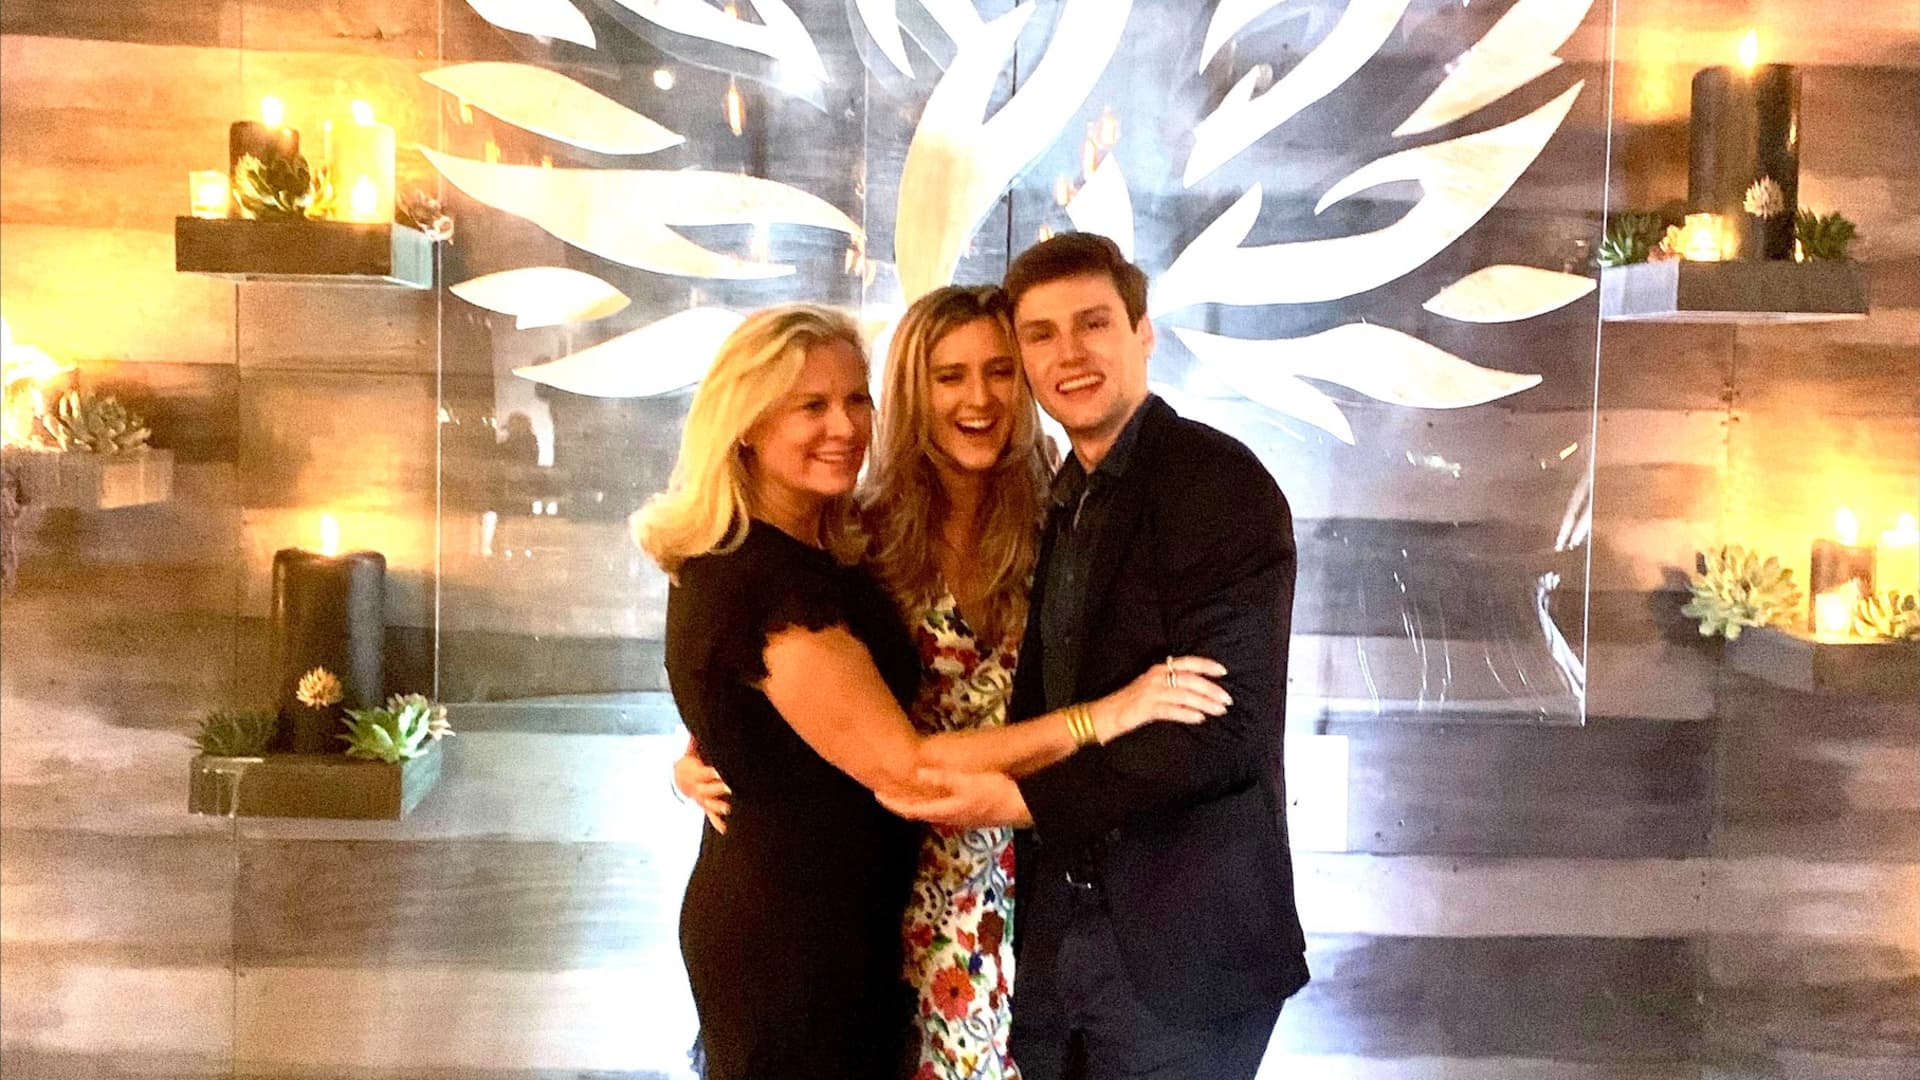 Jim Cramer's wife, Lisa Detwiler, with her daughter and son